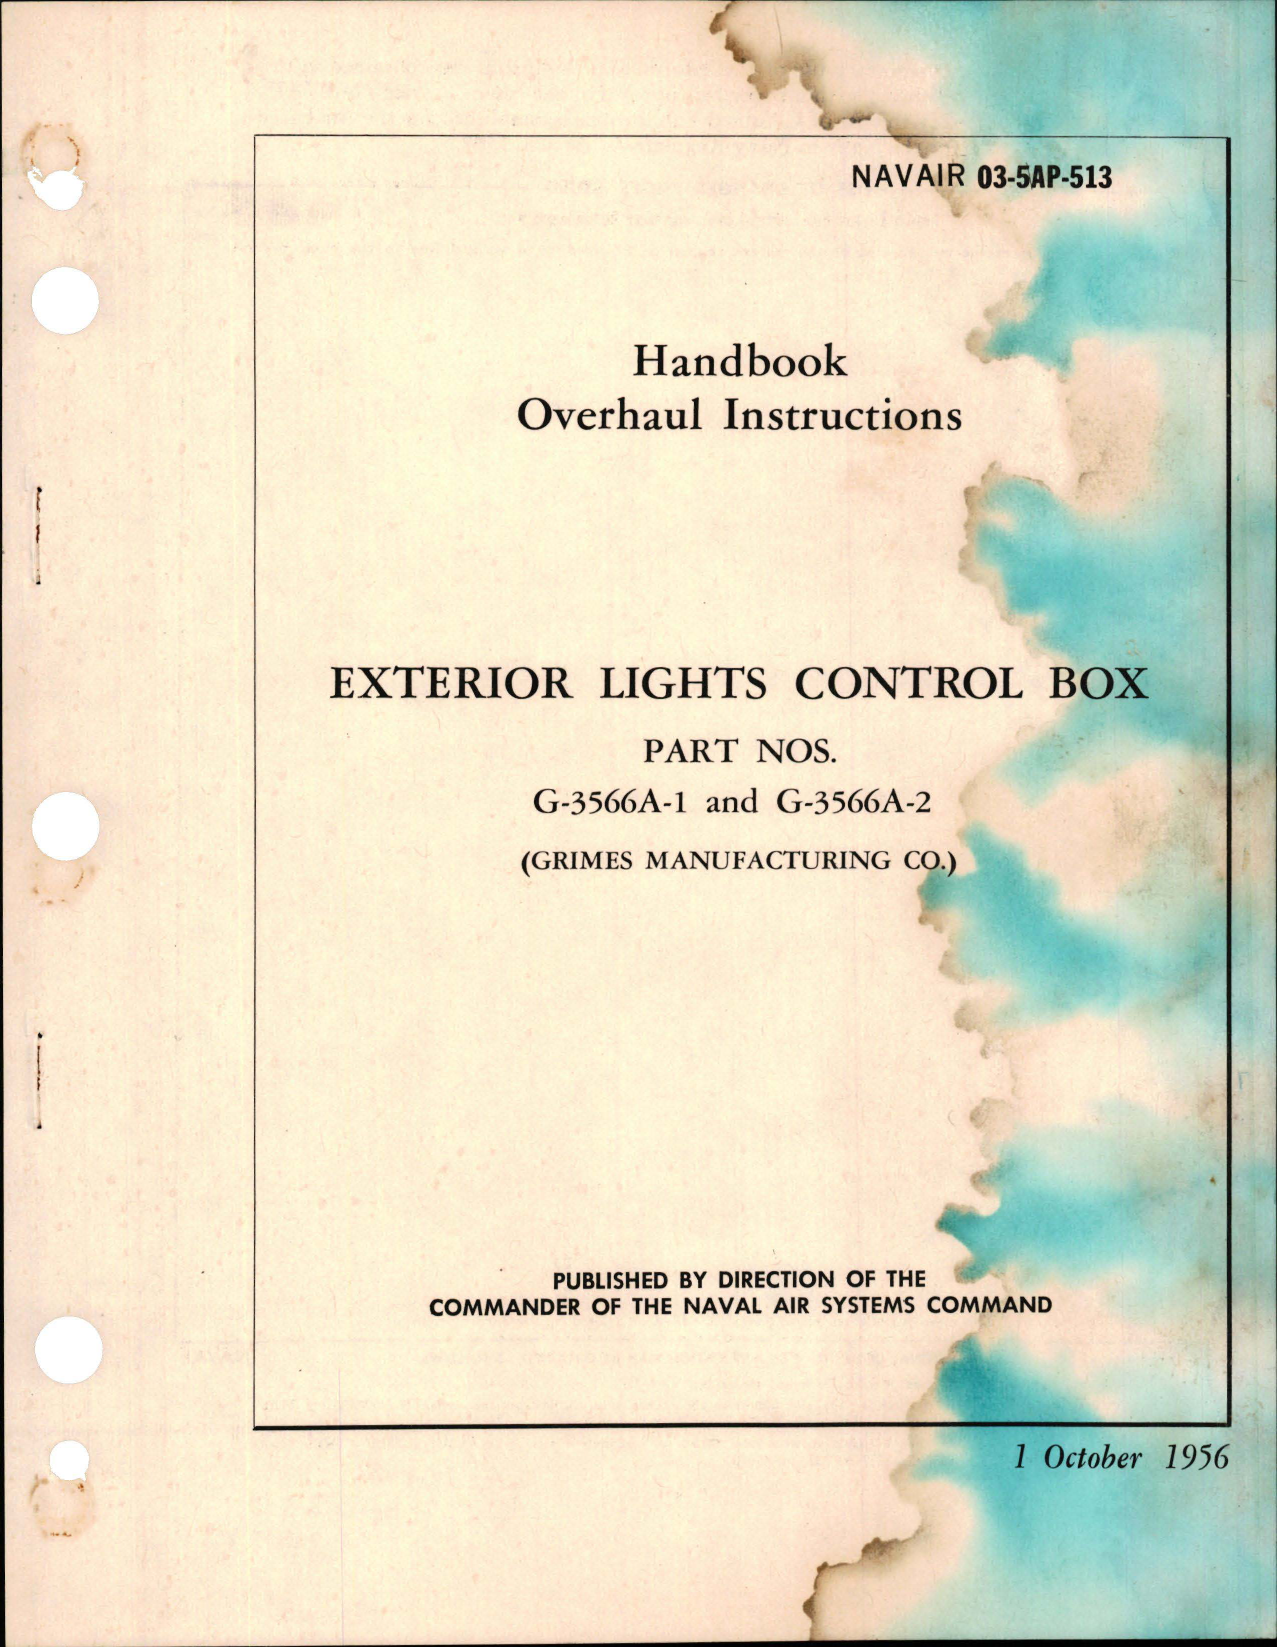 Sample page 1 from AirCorps Library document: Overhaul Instructions for Exterior Lights Control Box - Parts G-3566A-1 and G-3566A-2